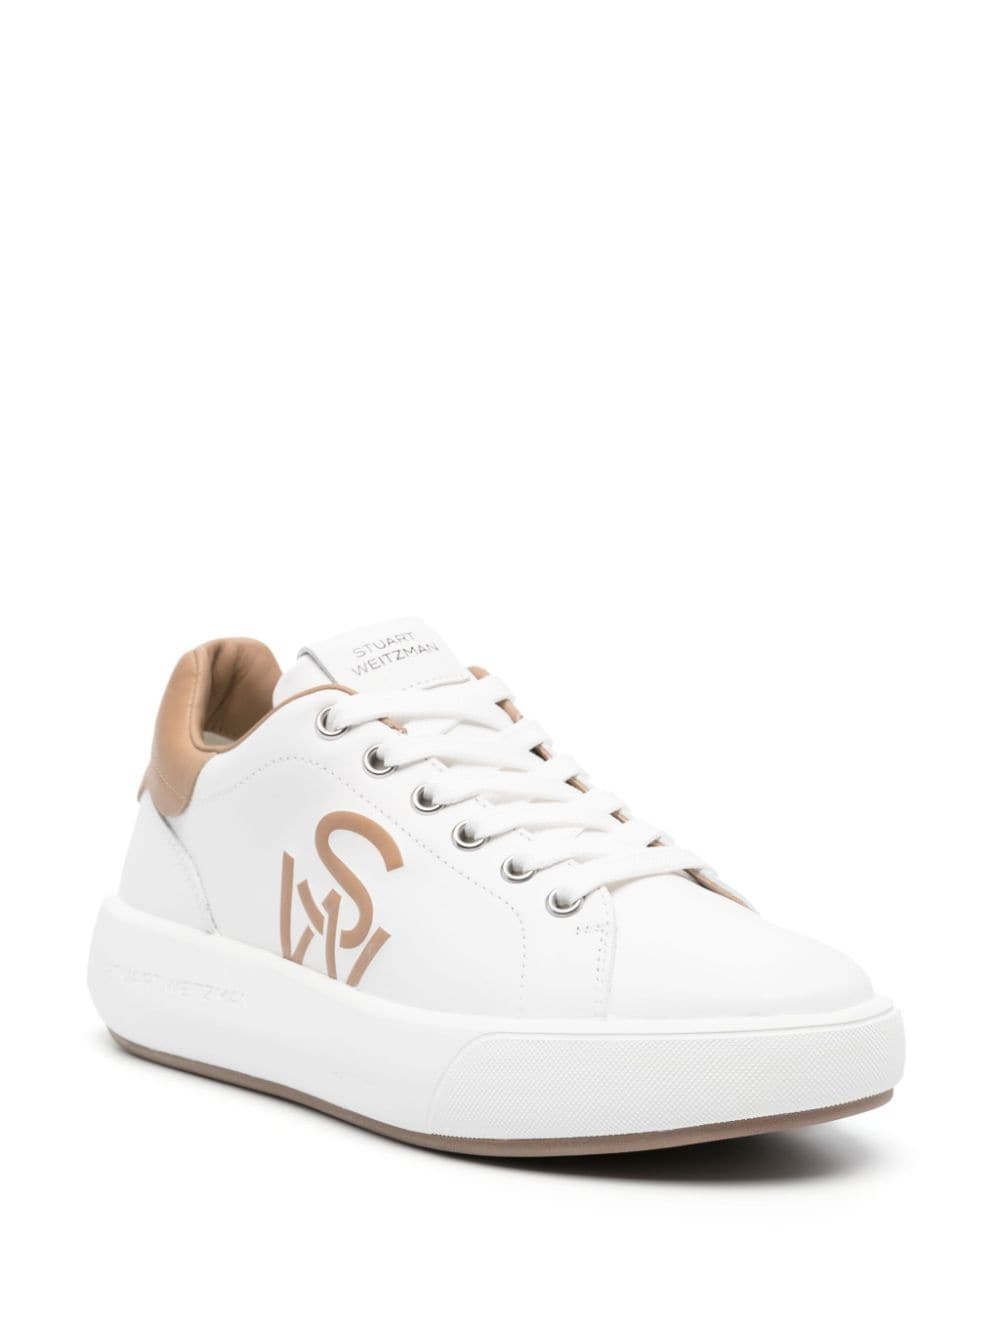 SW Pro leather sneakers - 2